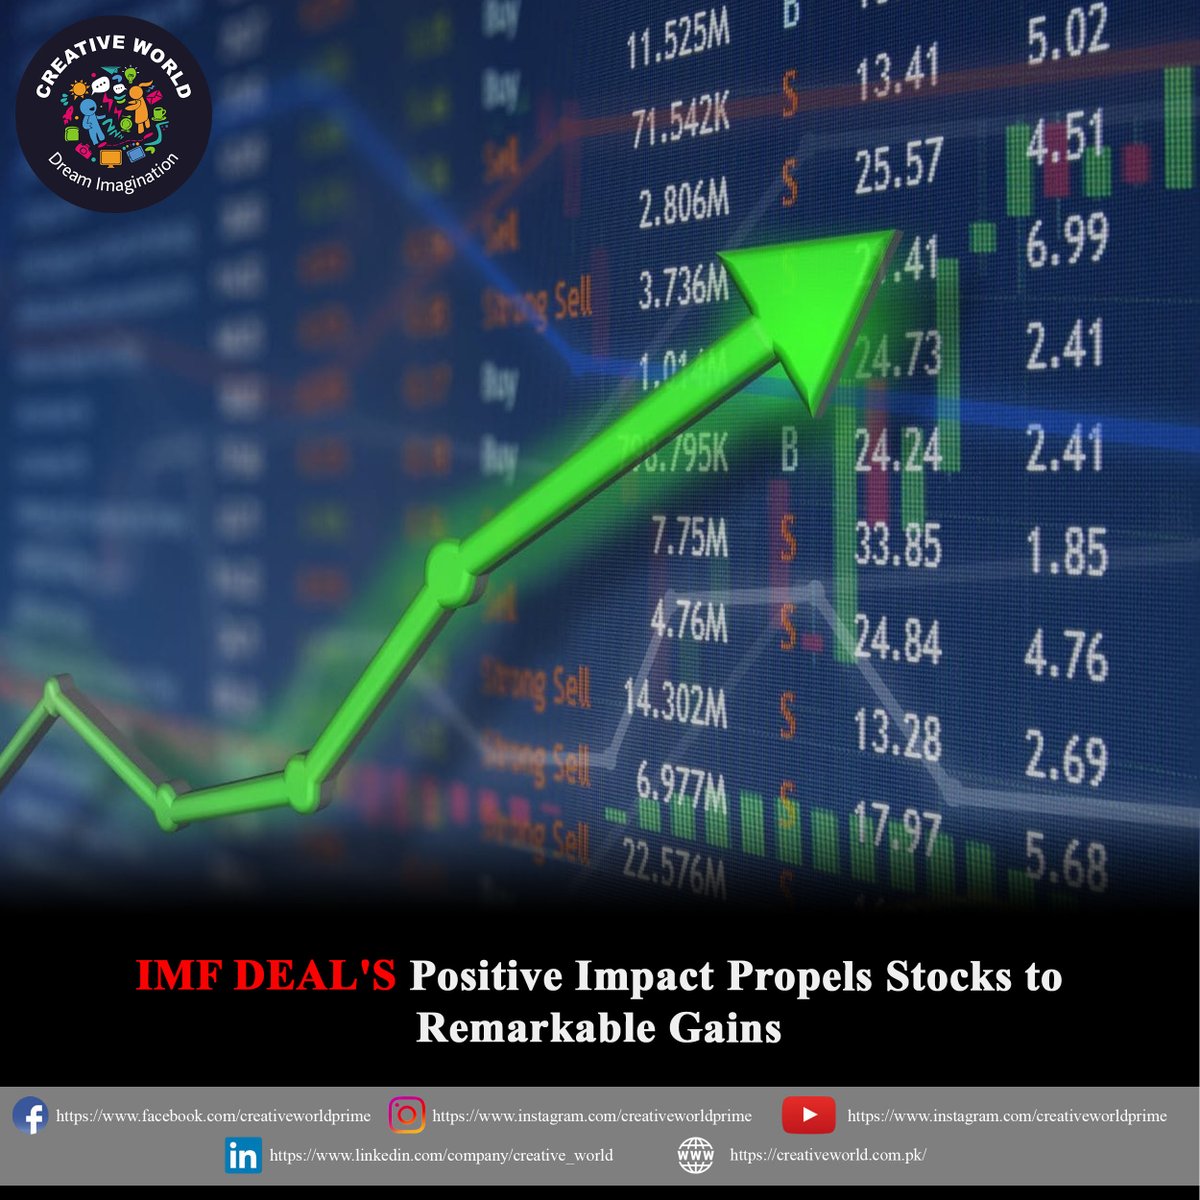 The positive impact of an impressive deal has propelled stocks to remarkable gains in the market.   

#viralpost #trendingnow #news #NewsUpdate #stockmarketgains #strategicacquisition #profitability #Dollar #ImranKhanOnMSNBC #Karachi